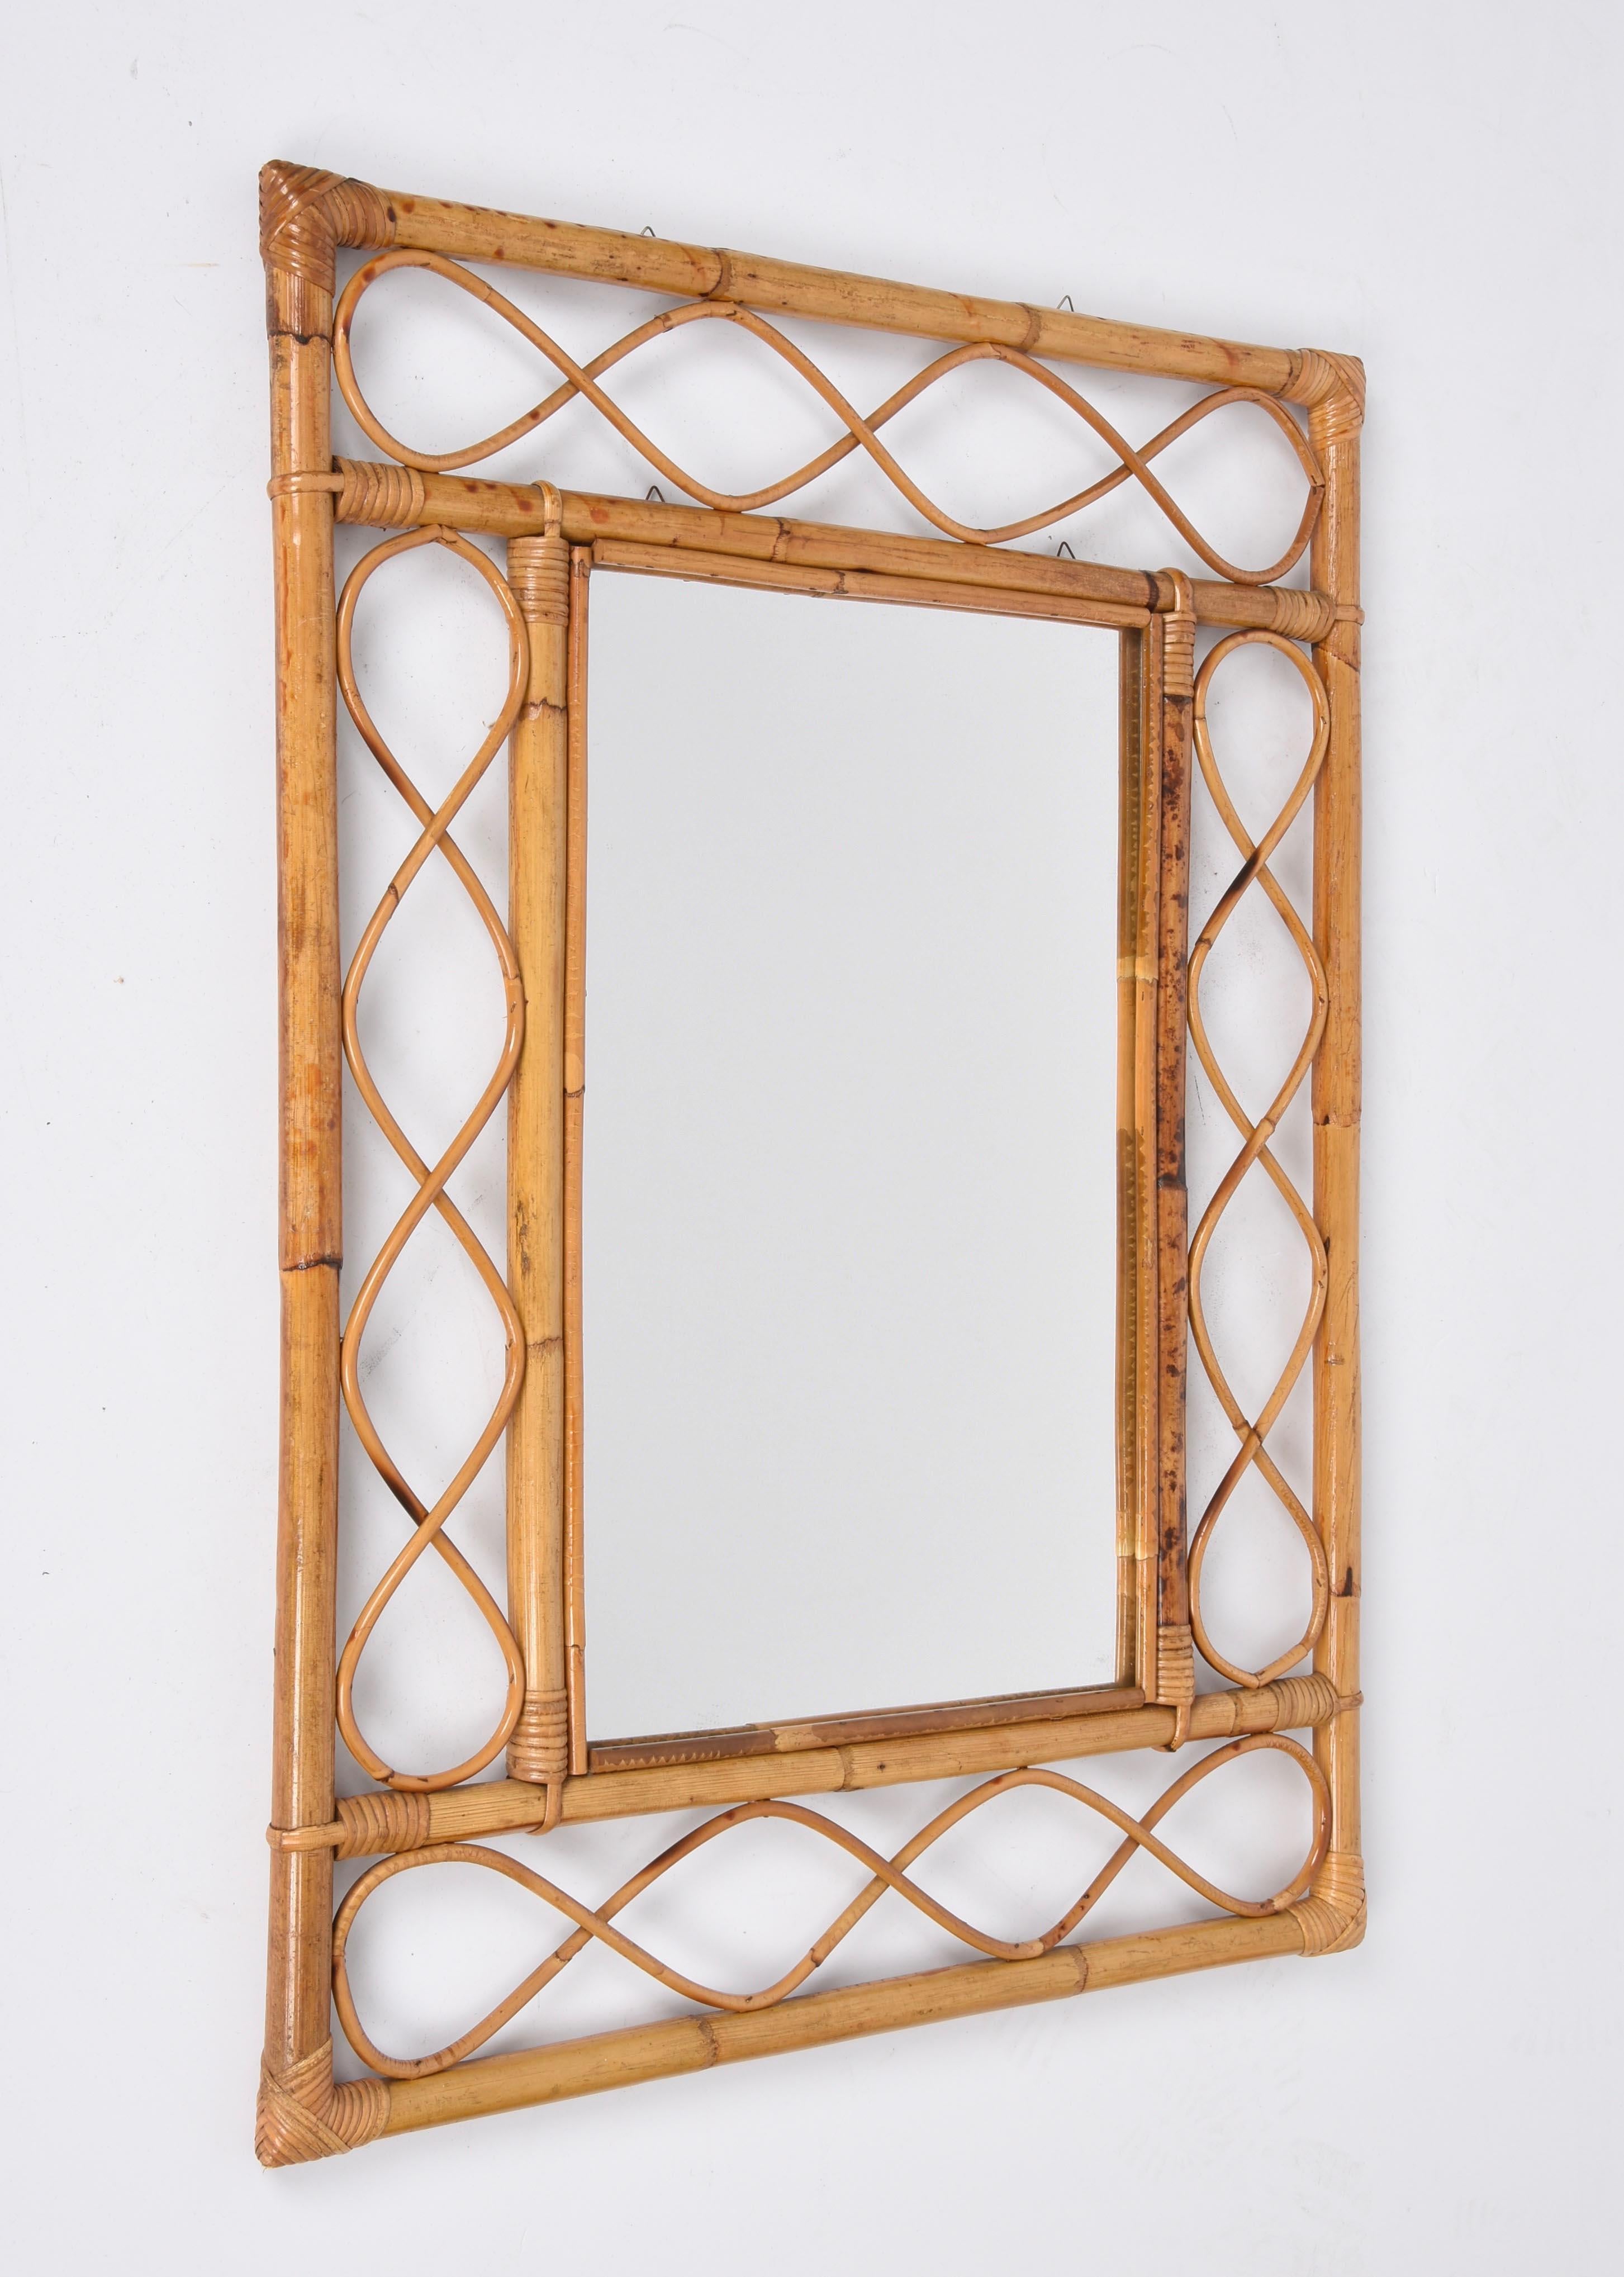 Midcentury French Riviera Bamboo and Rattan Rectangular Wall Mirror France 1960s 6